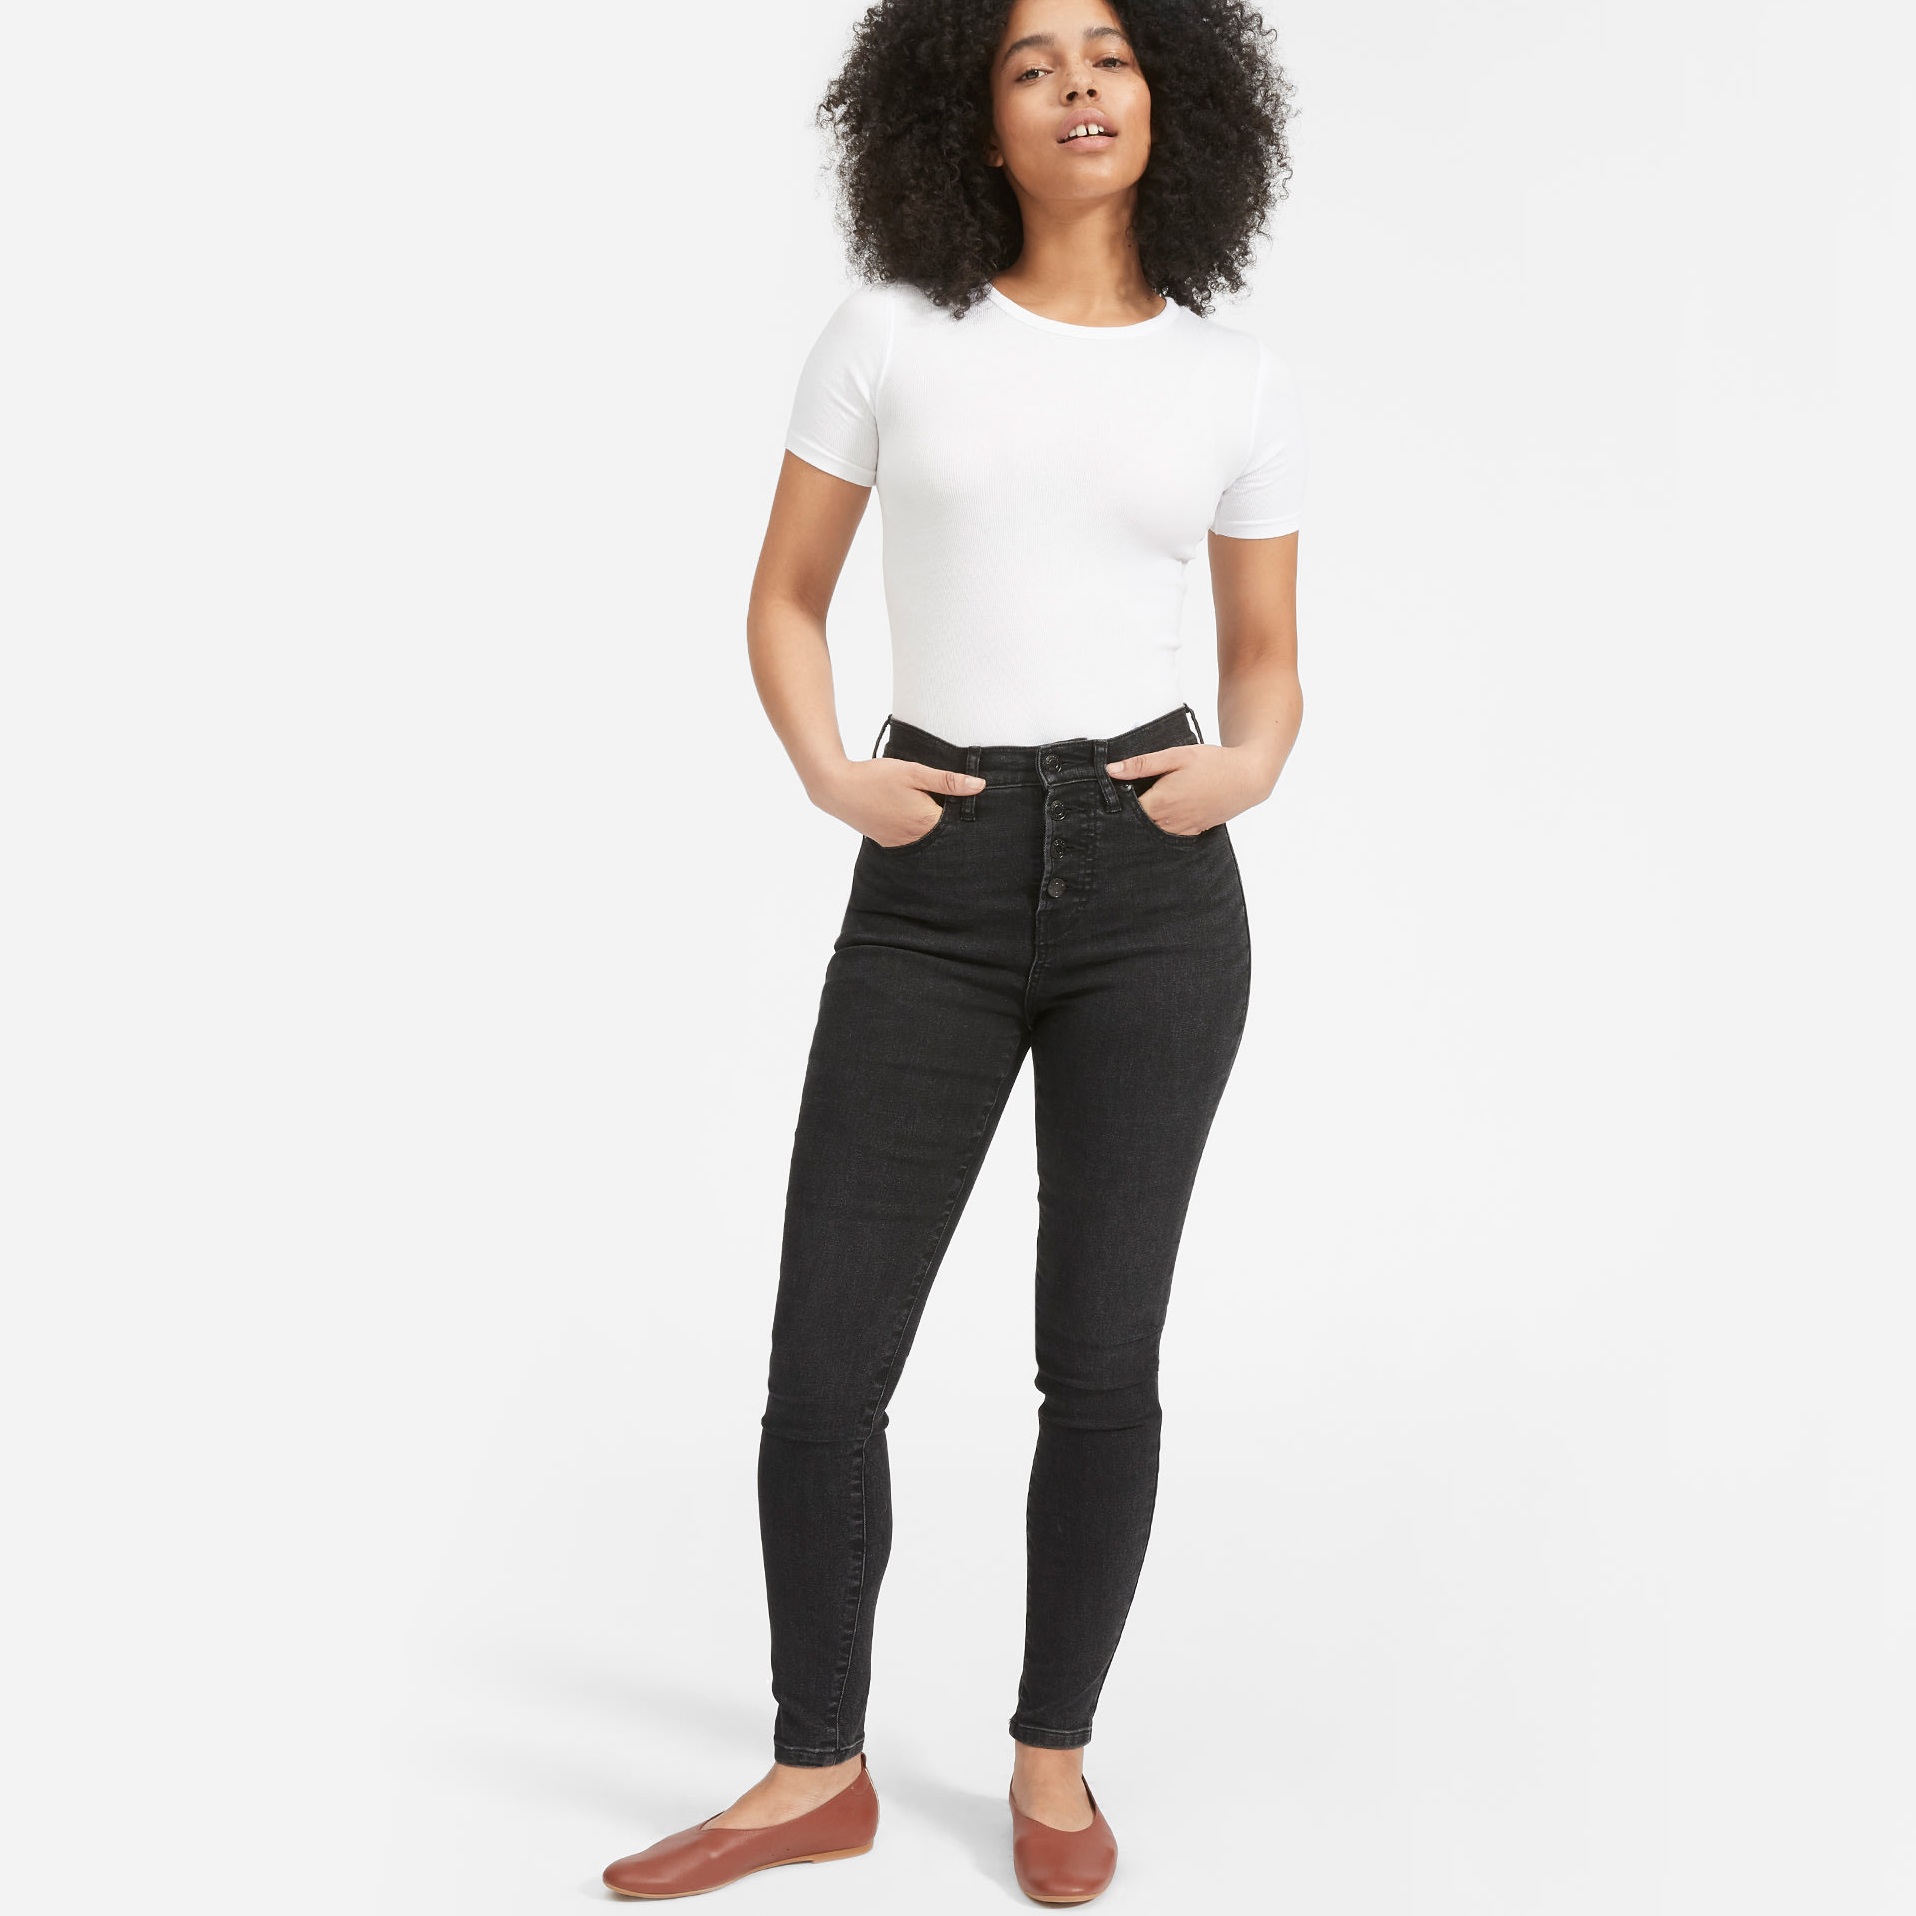 AUTHENTIC STRETCH HIGH-RISE SKINNY BUTTON FLY Everlane